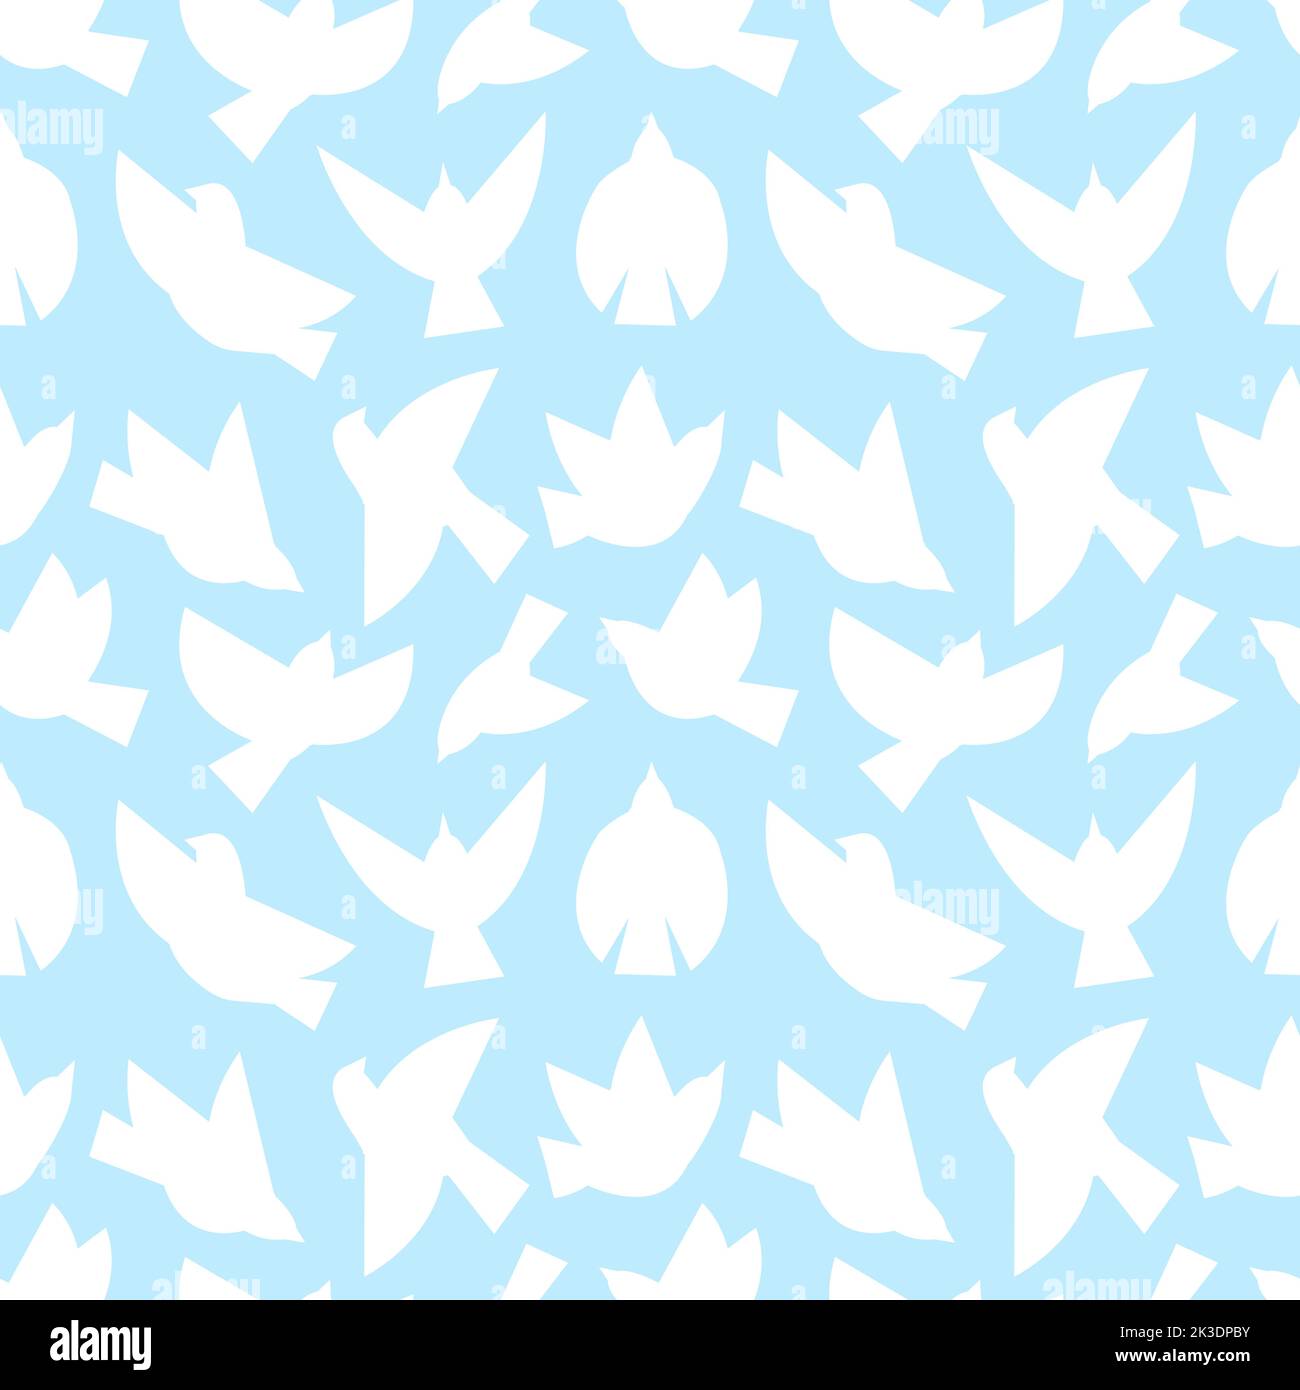 Flying bird abstract silhouettes on blue background. White bird, dove or seagull seamless pattern. Flat different poses doves fabric print. Vector Stock Vector